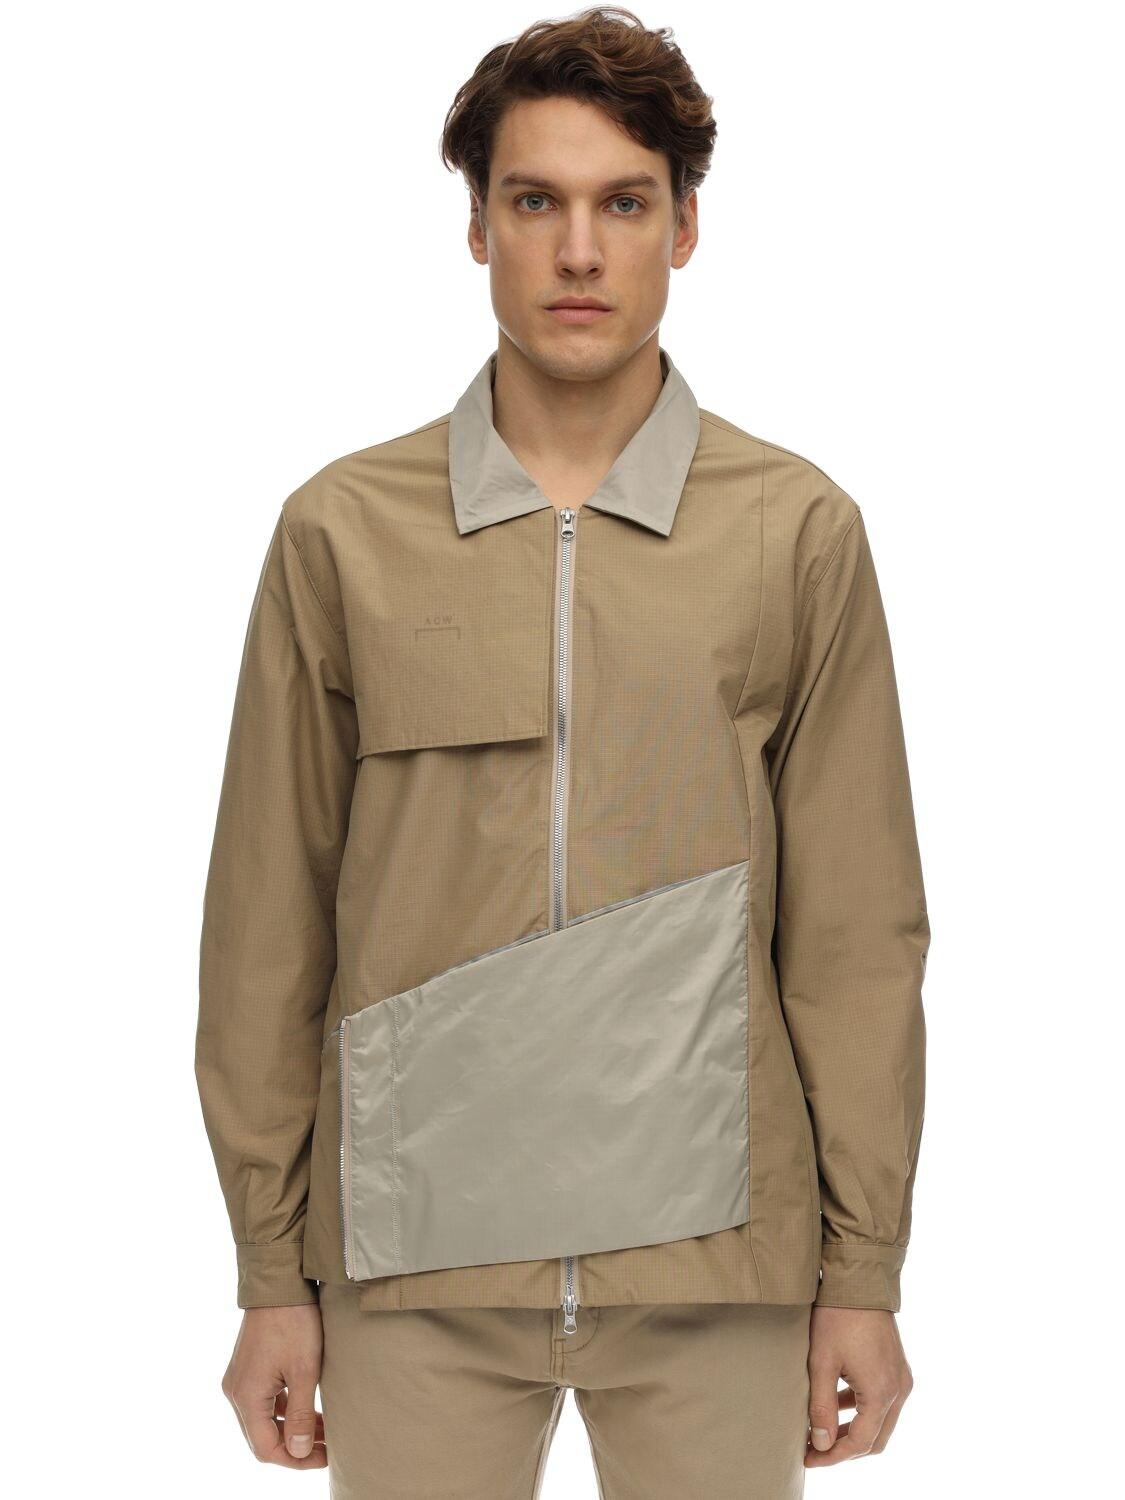 Converse A-cold-wall Coaches Jacket in Beige (Natural) for Men - Lyst